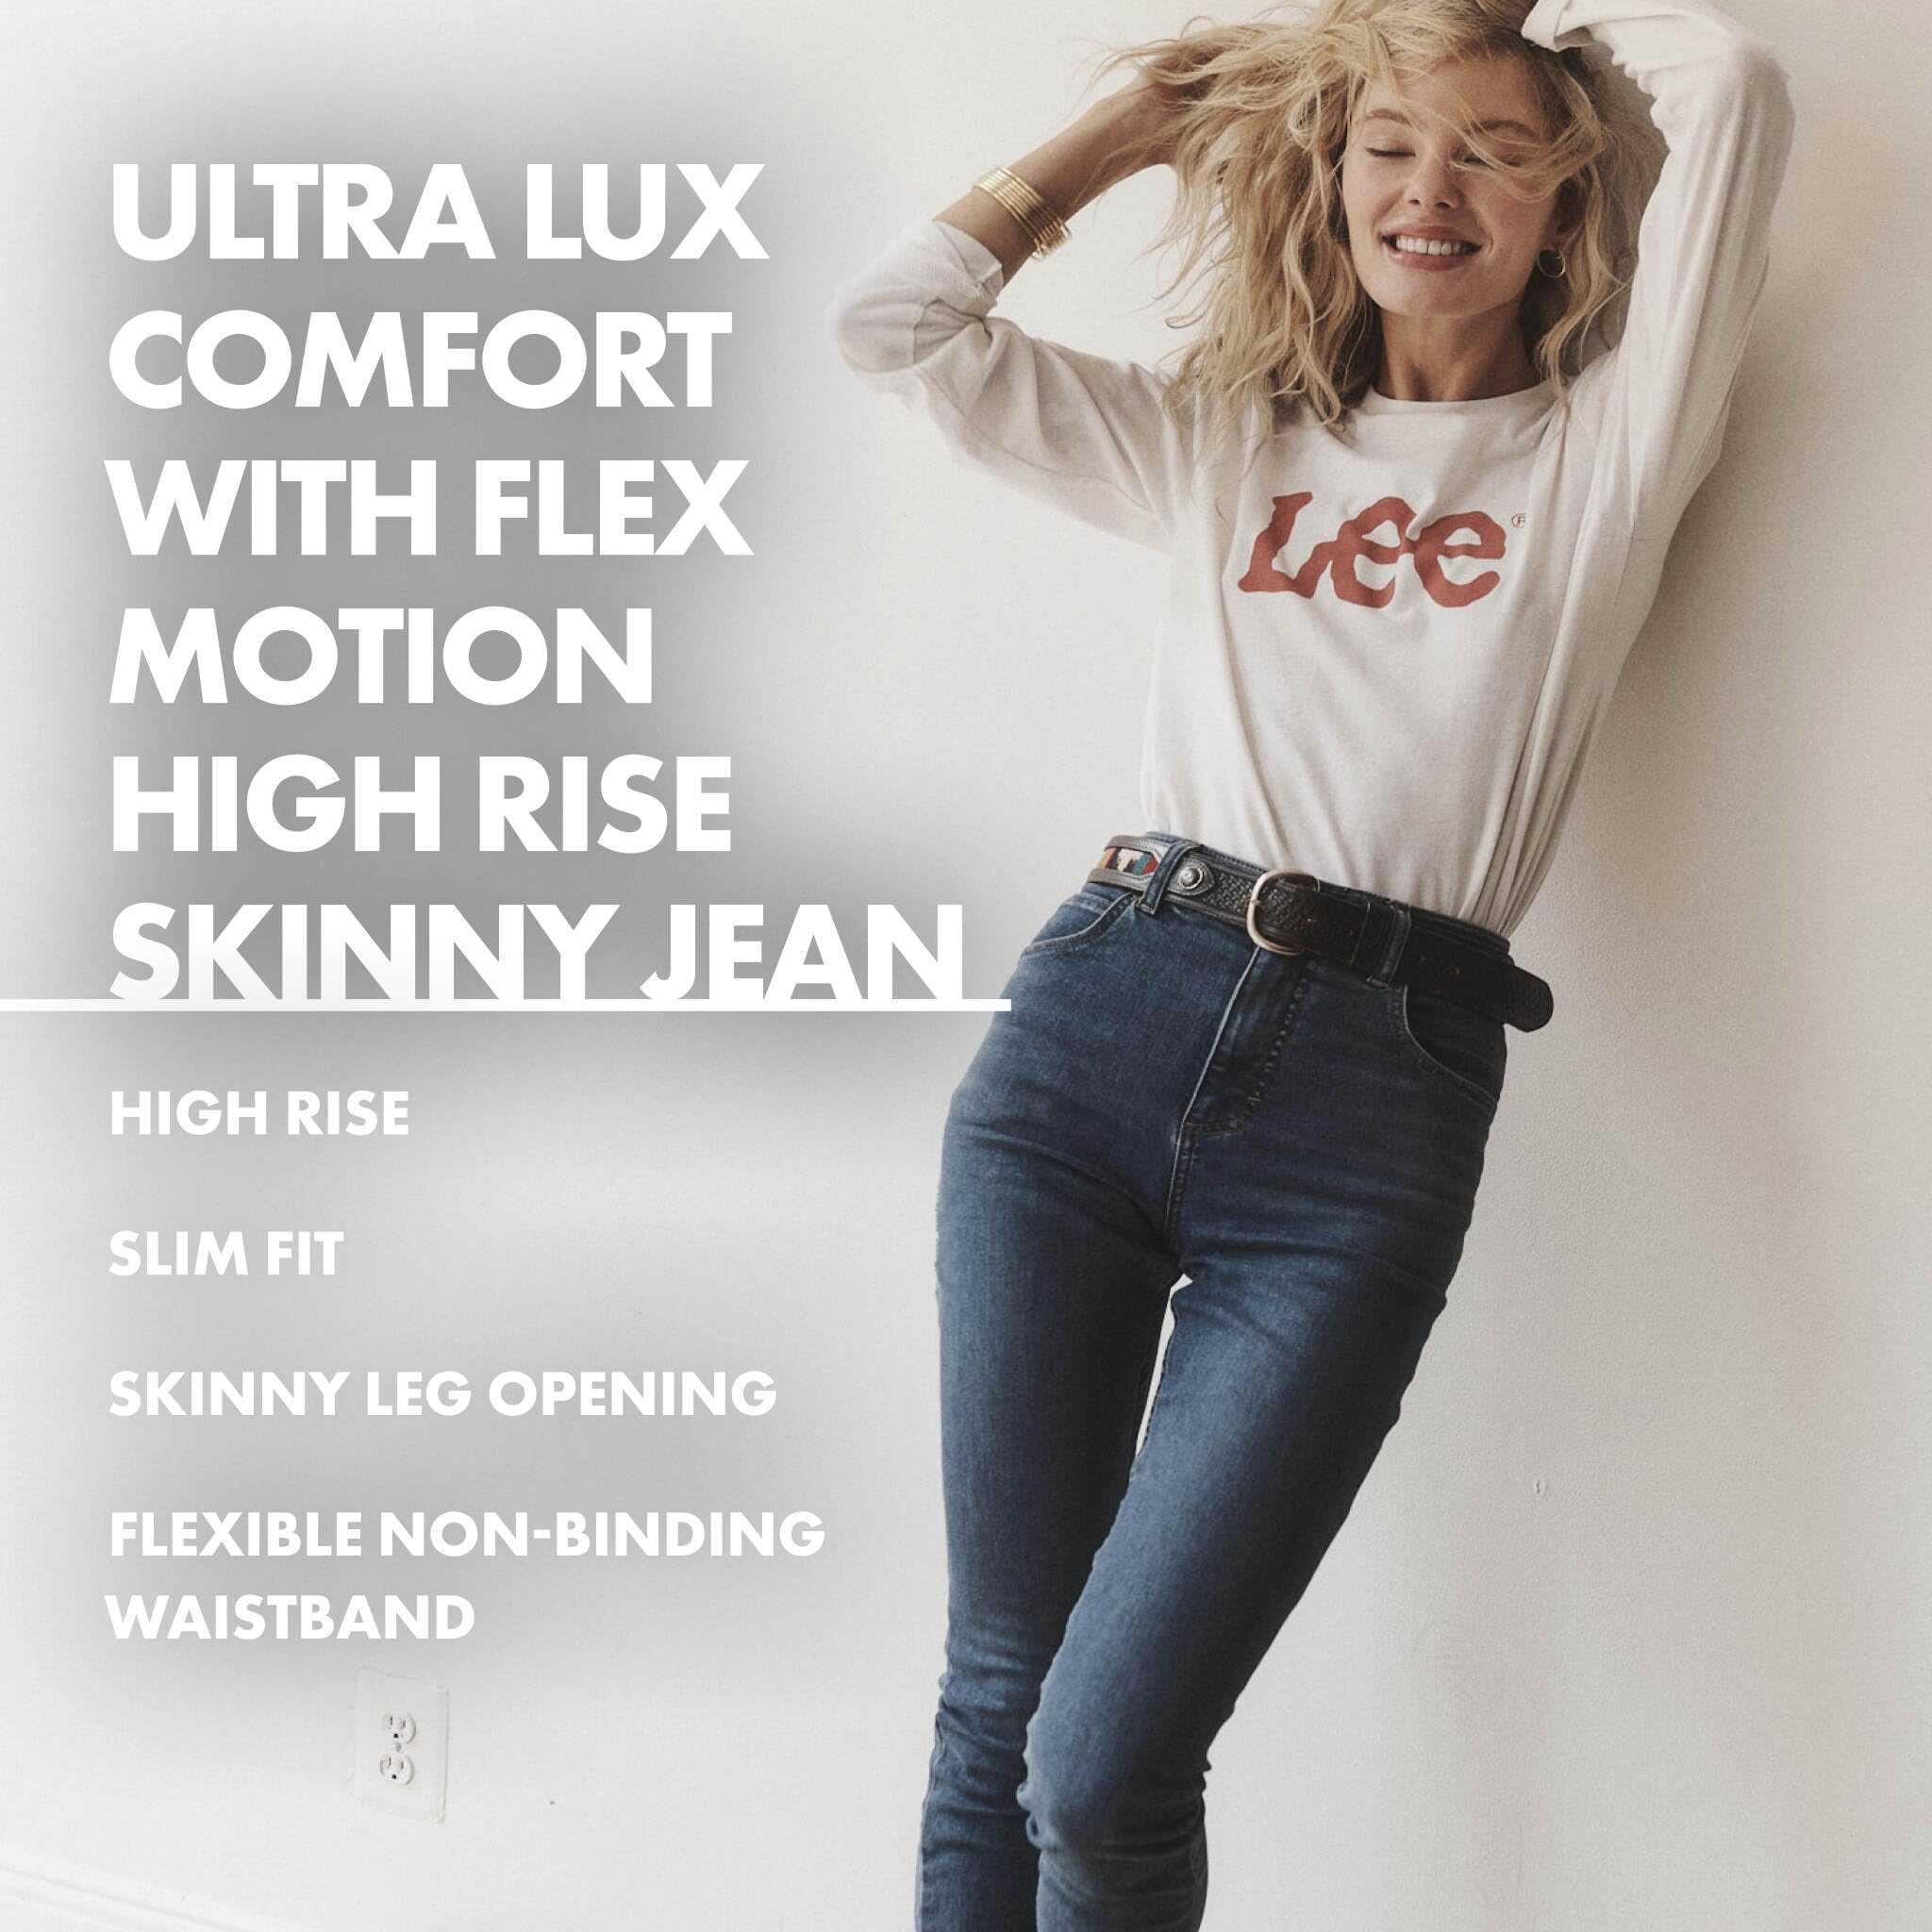 Lee Women's Ultra Lux Comfort with Flex Motion High Rise Skinny Jean